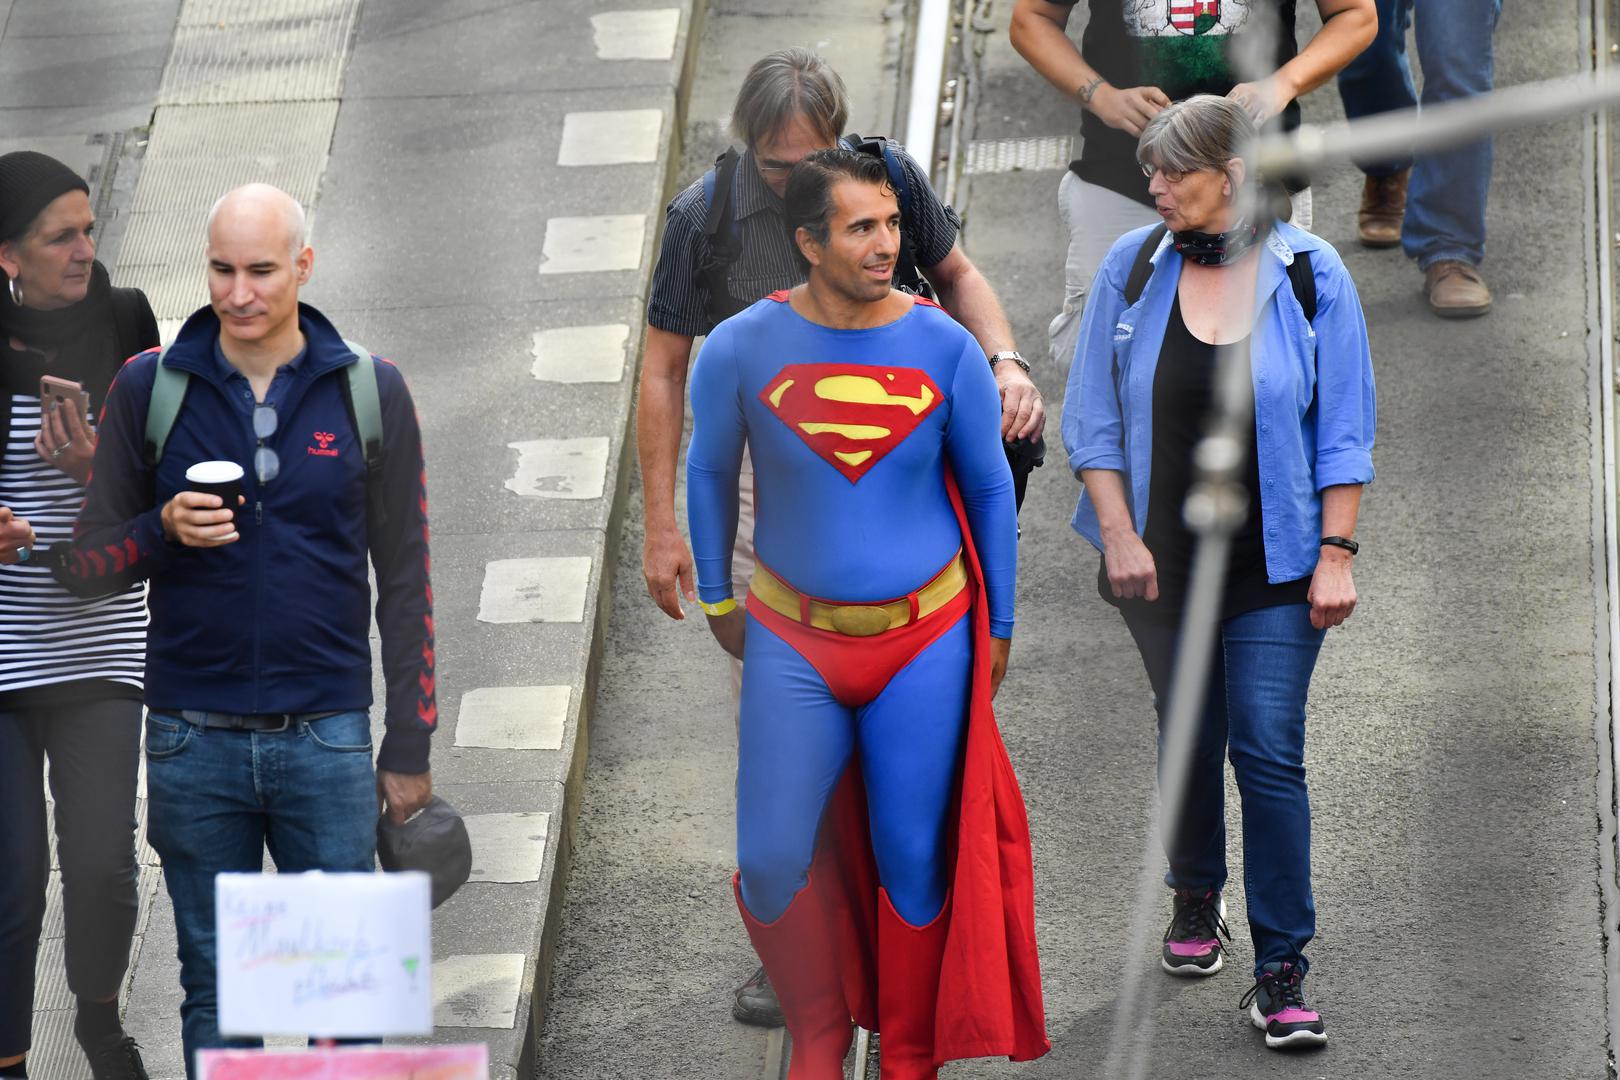 29 August 2020, Berlin: A participant in a Superman costume is walking in Friedrichstraße during a demonstration against the Corona measures. Photo: Paul Zinken/dpa /DPA/PIXSELL